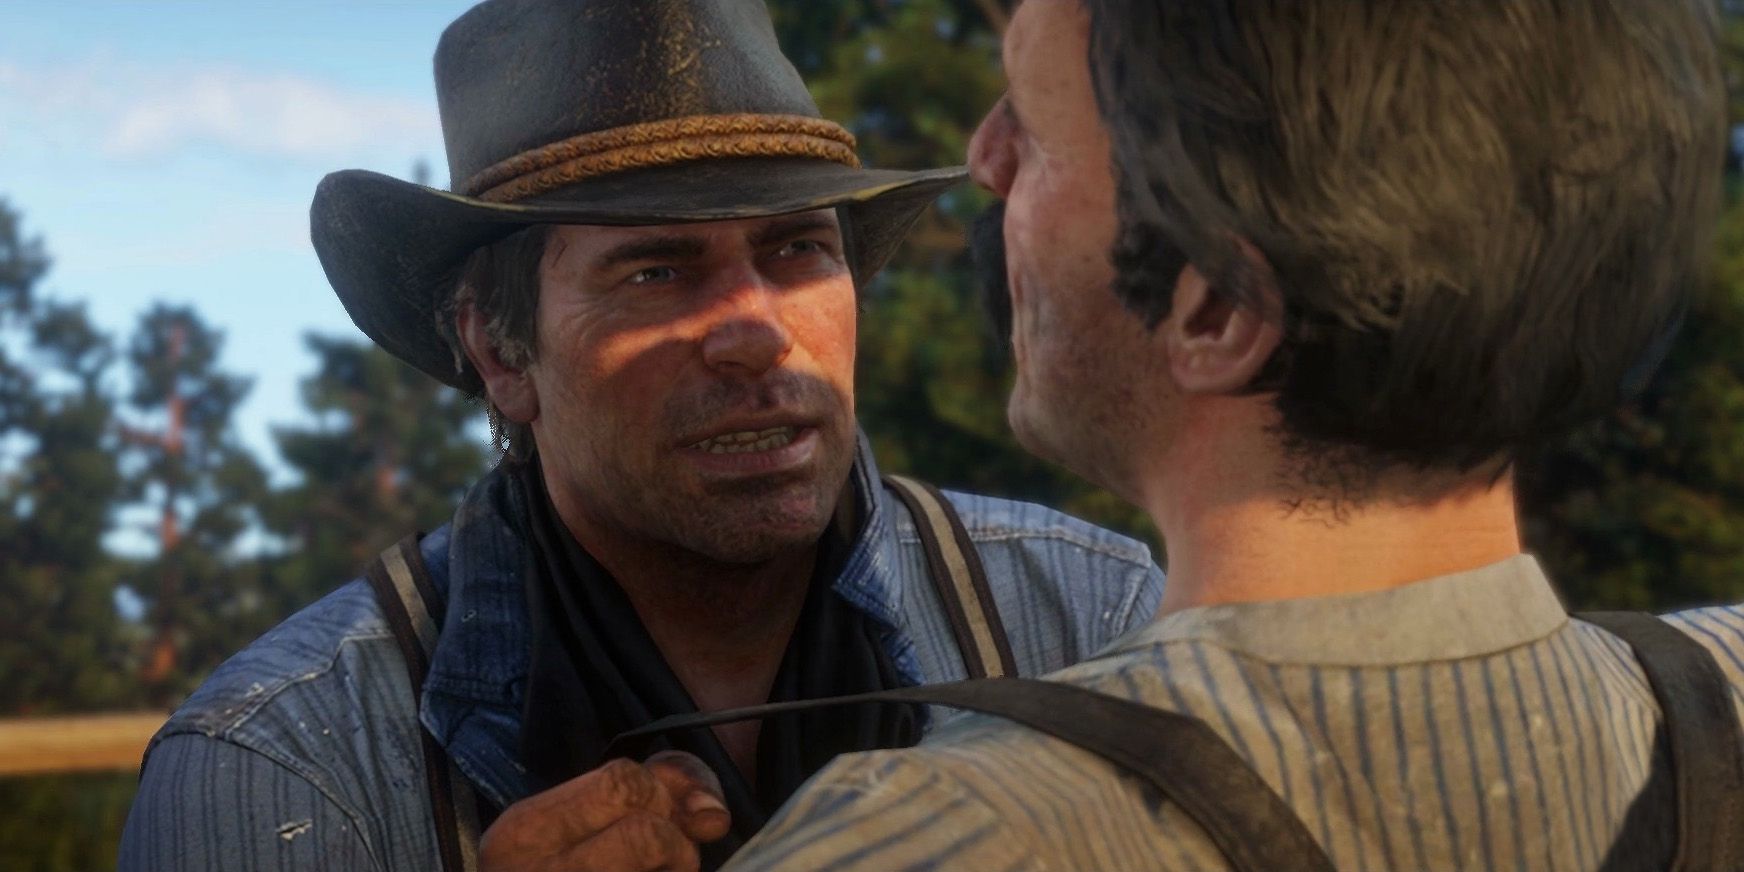 Arthur made life very difficult for the Downes family in Red Dead 2